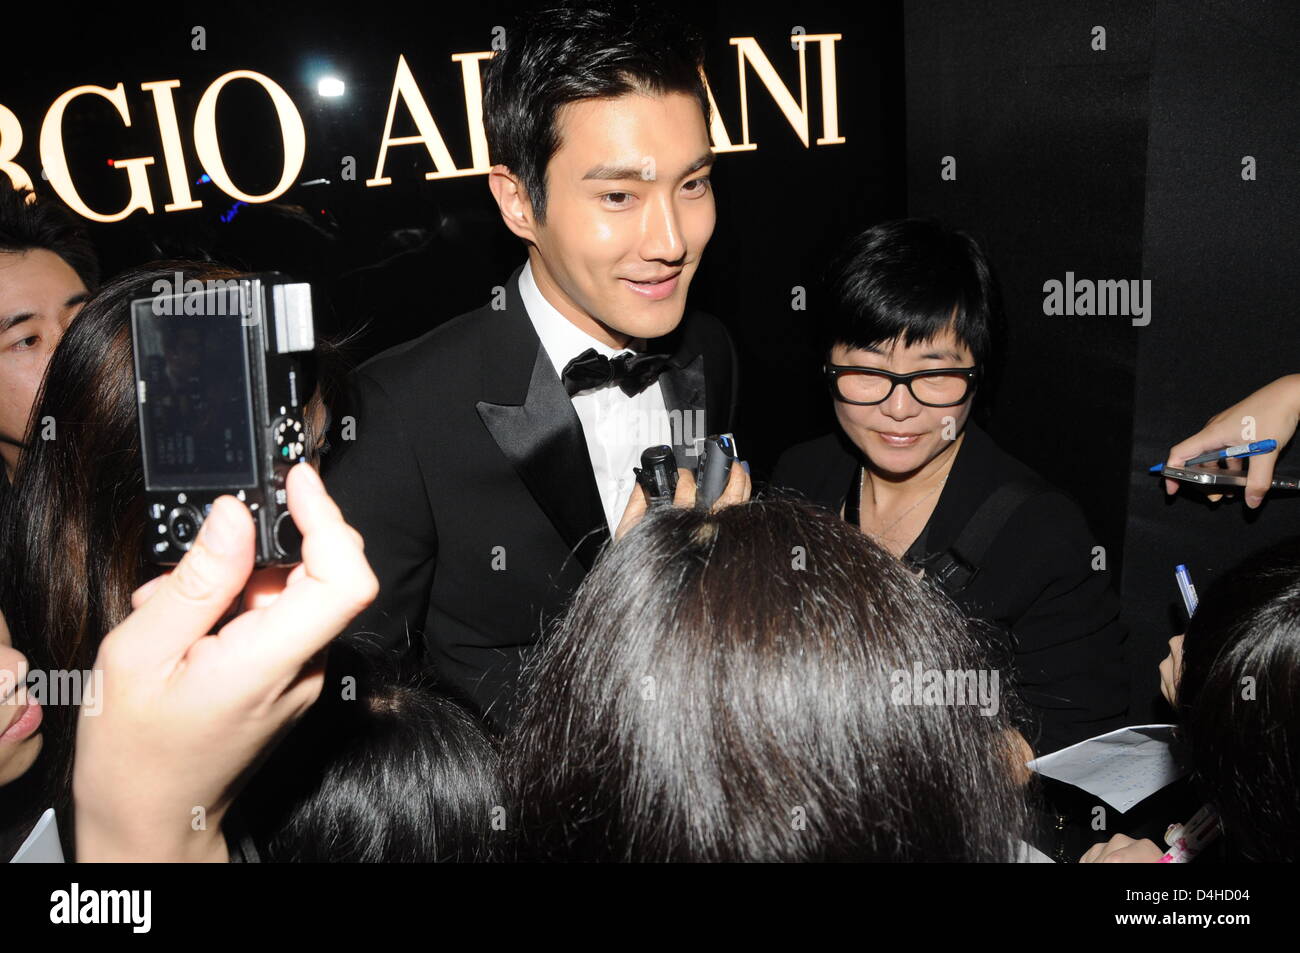 Choi Siwon at Giorgio Armani's new store opening ceremony in Hong Kong, China on Wednesday March 13, 2013. Stock Photo